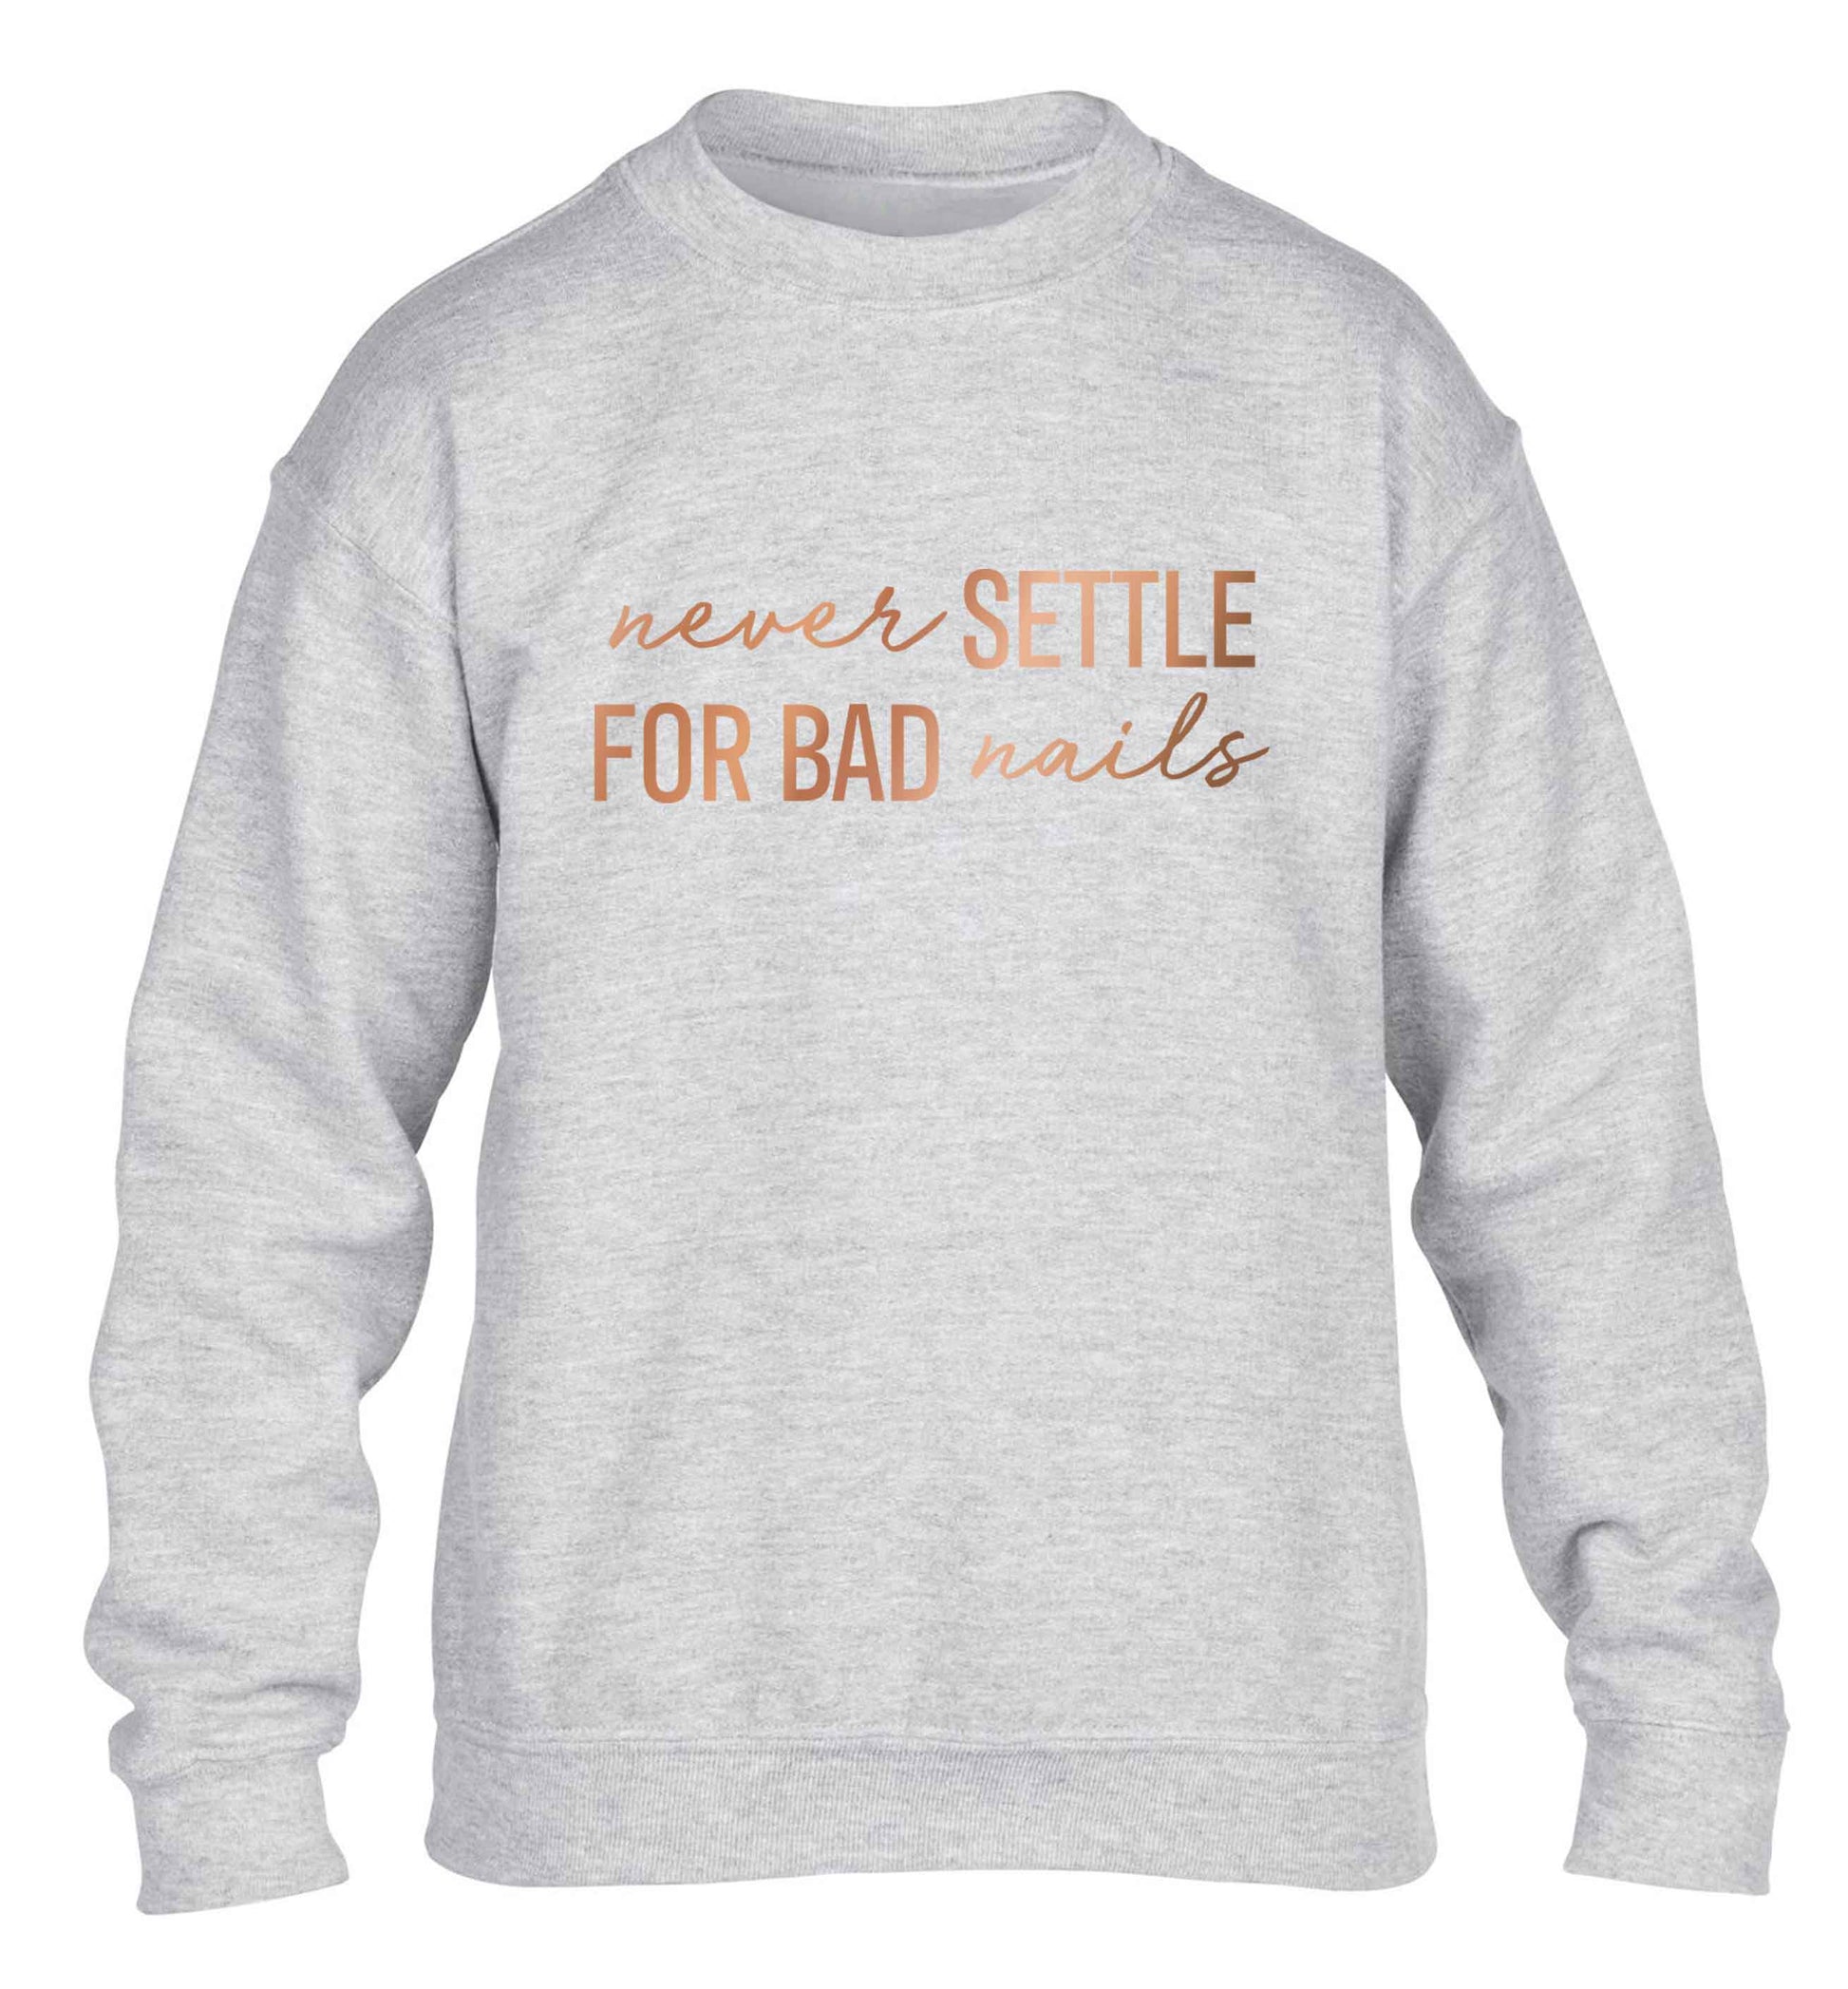 Never settle for bad nails - rose gold children's grey sweater 12-13 Years